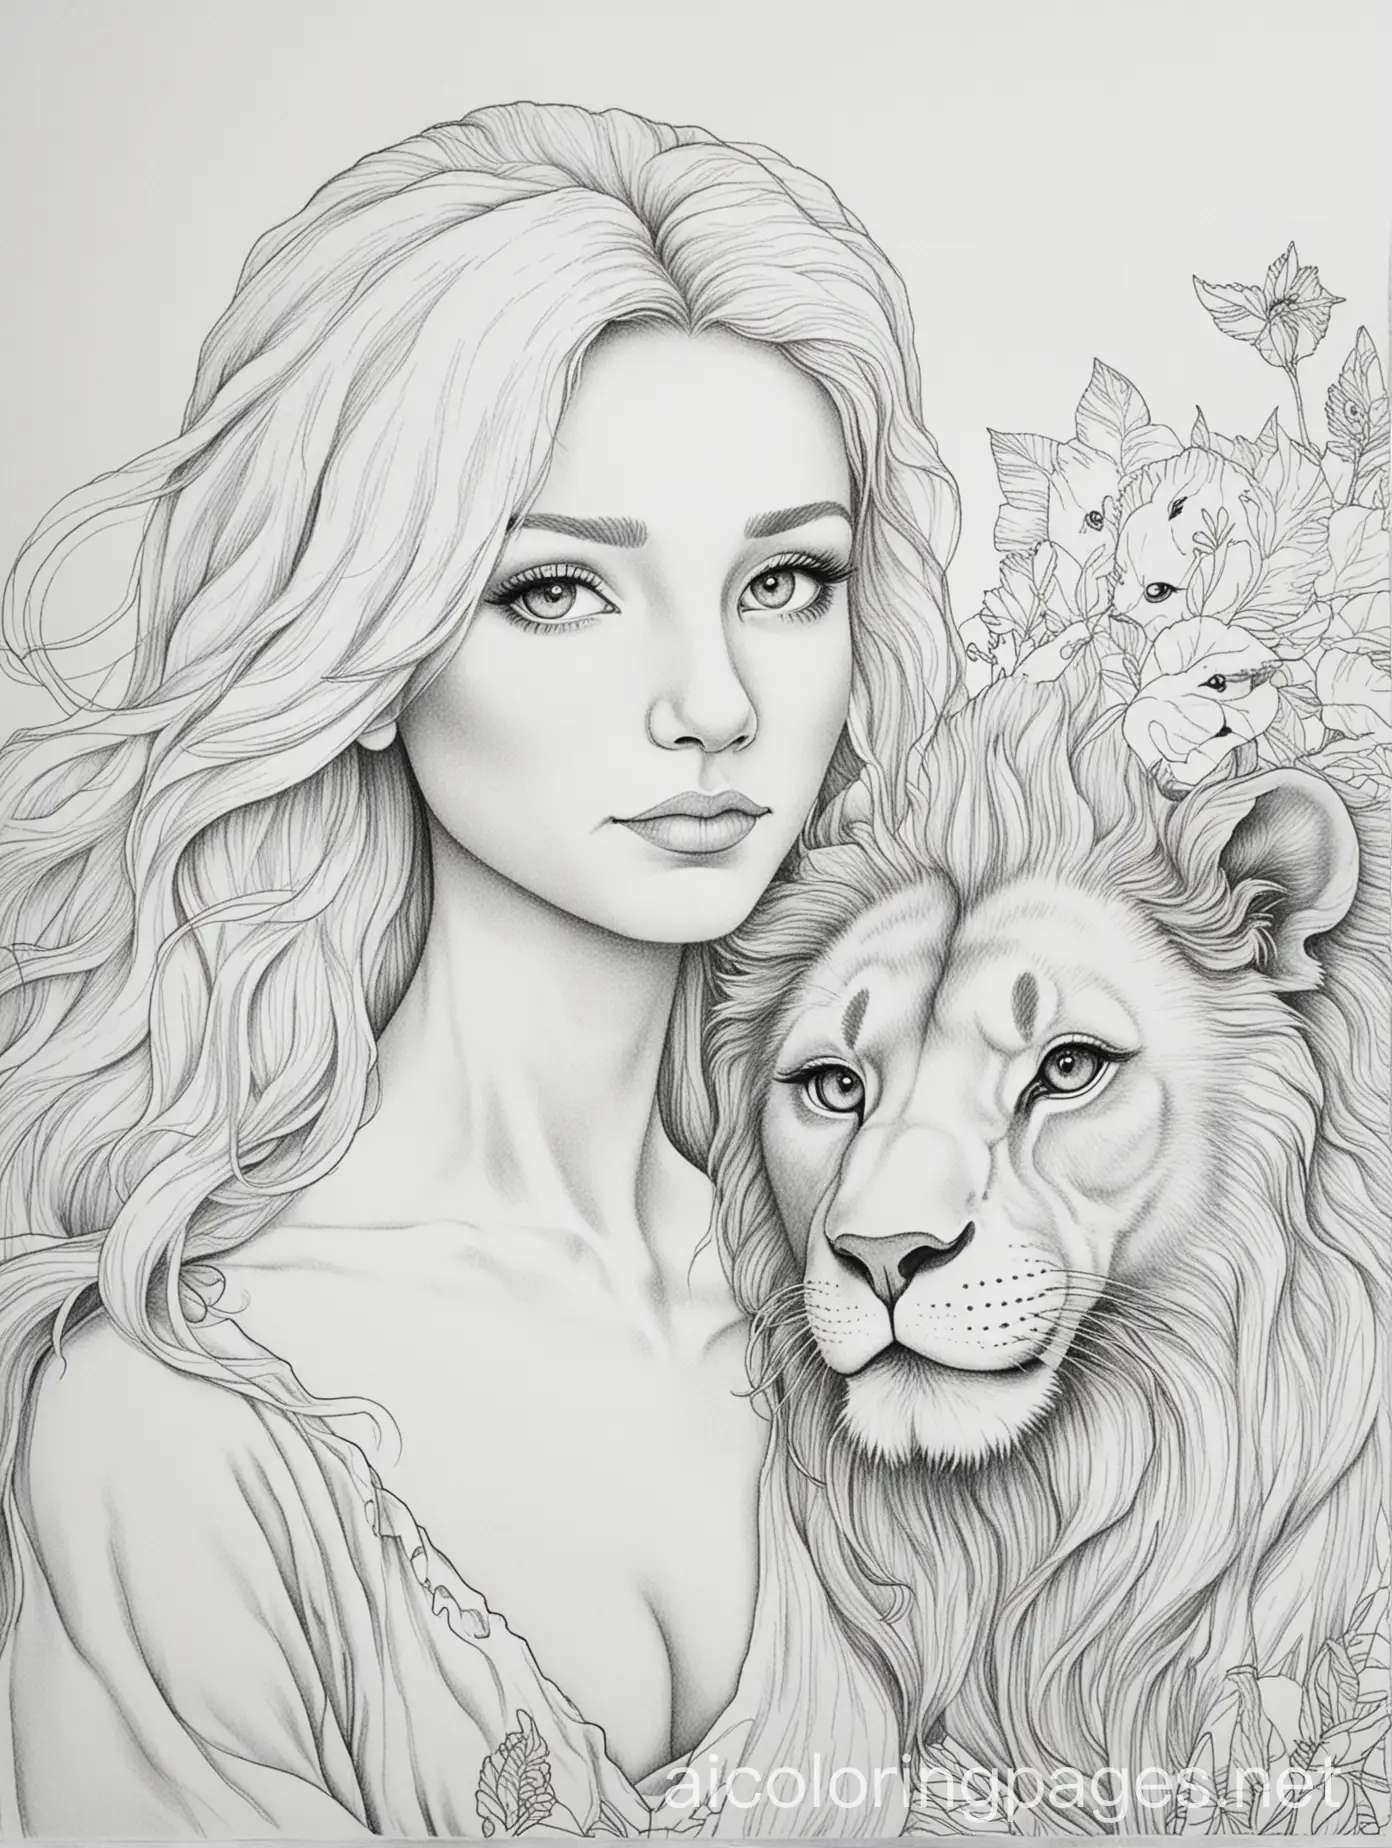 lion and white haired lady adult colouring page line art , Coloring Page, black and white, line art, white background, Simplicity, Ample White Space. The background of the coloring page is plain white to make it easy for young children to color within the lines. The outlines of all the subjects are easy to distinguish, making it simple for kids to color without too much difficulty